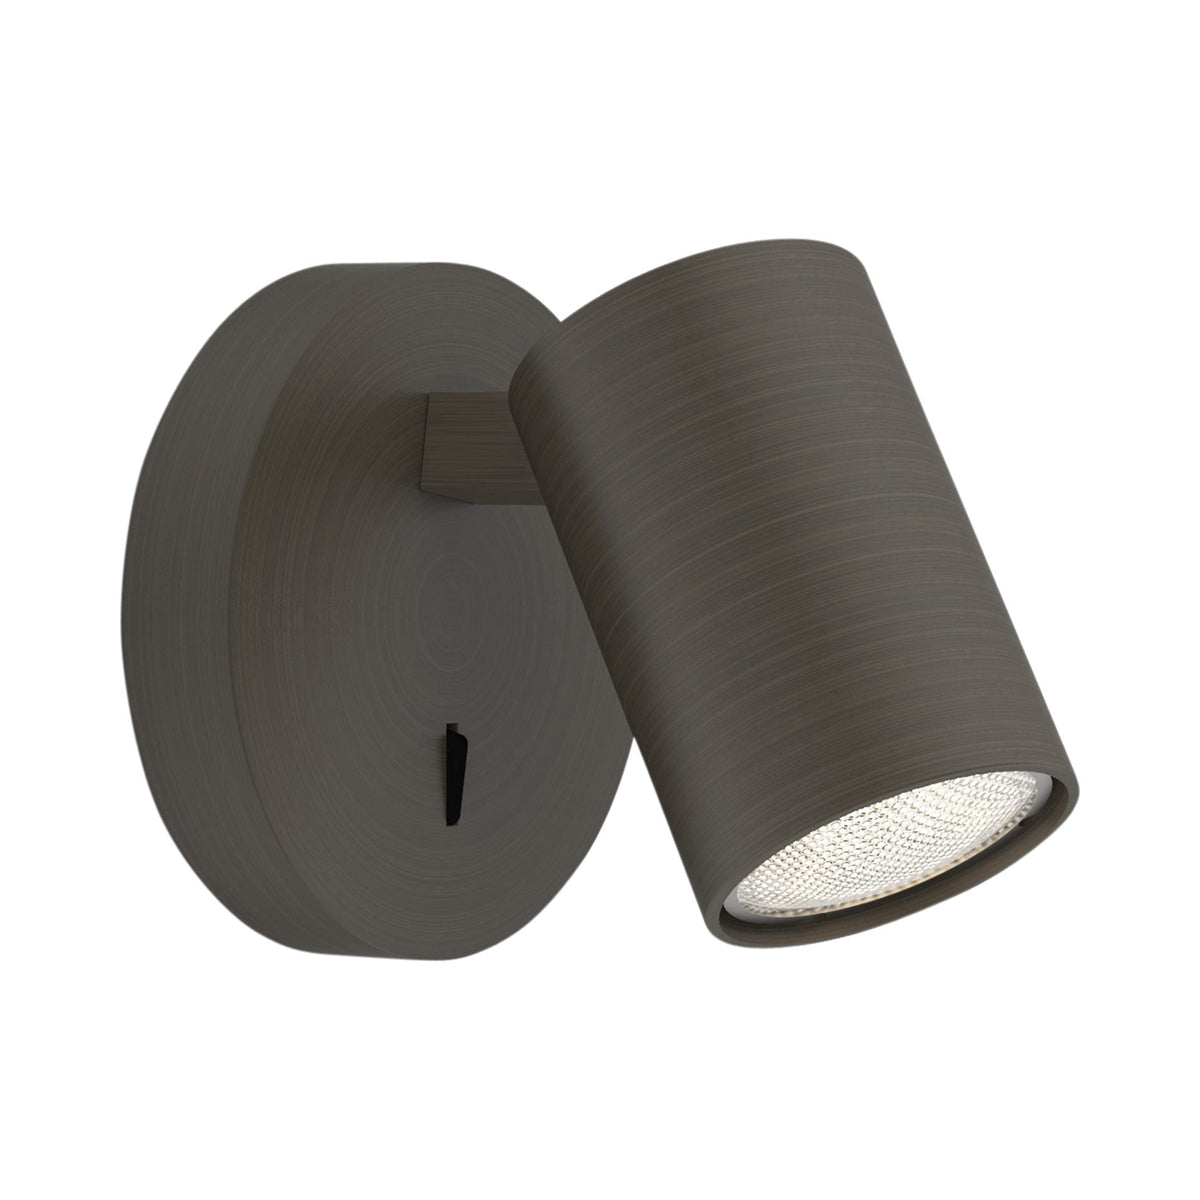 Astro Lighting Ascoli Single Switched Wall Sconce in Black 1286121